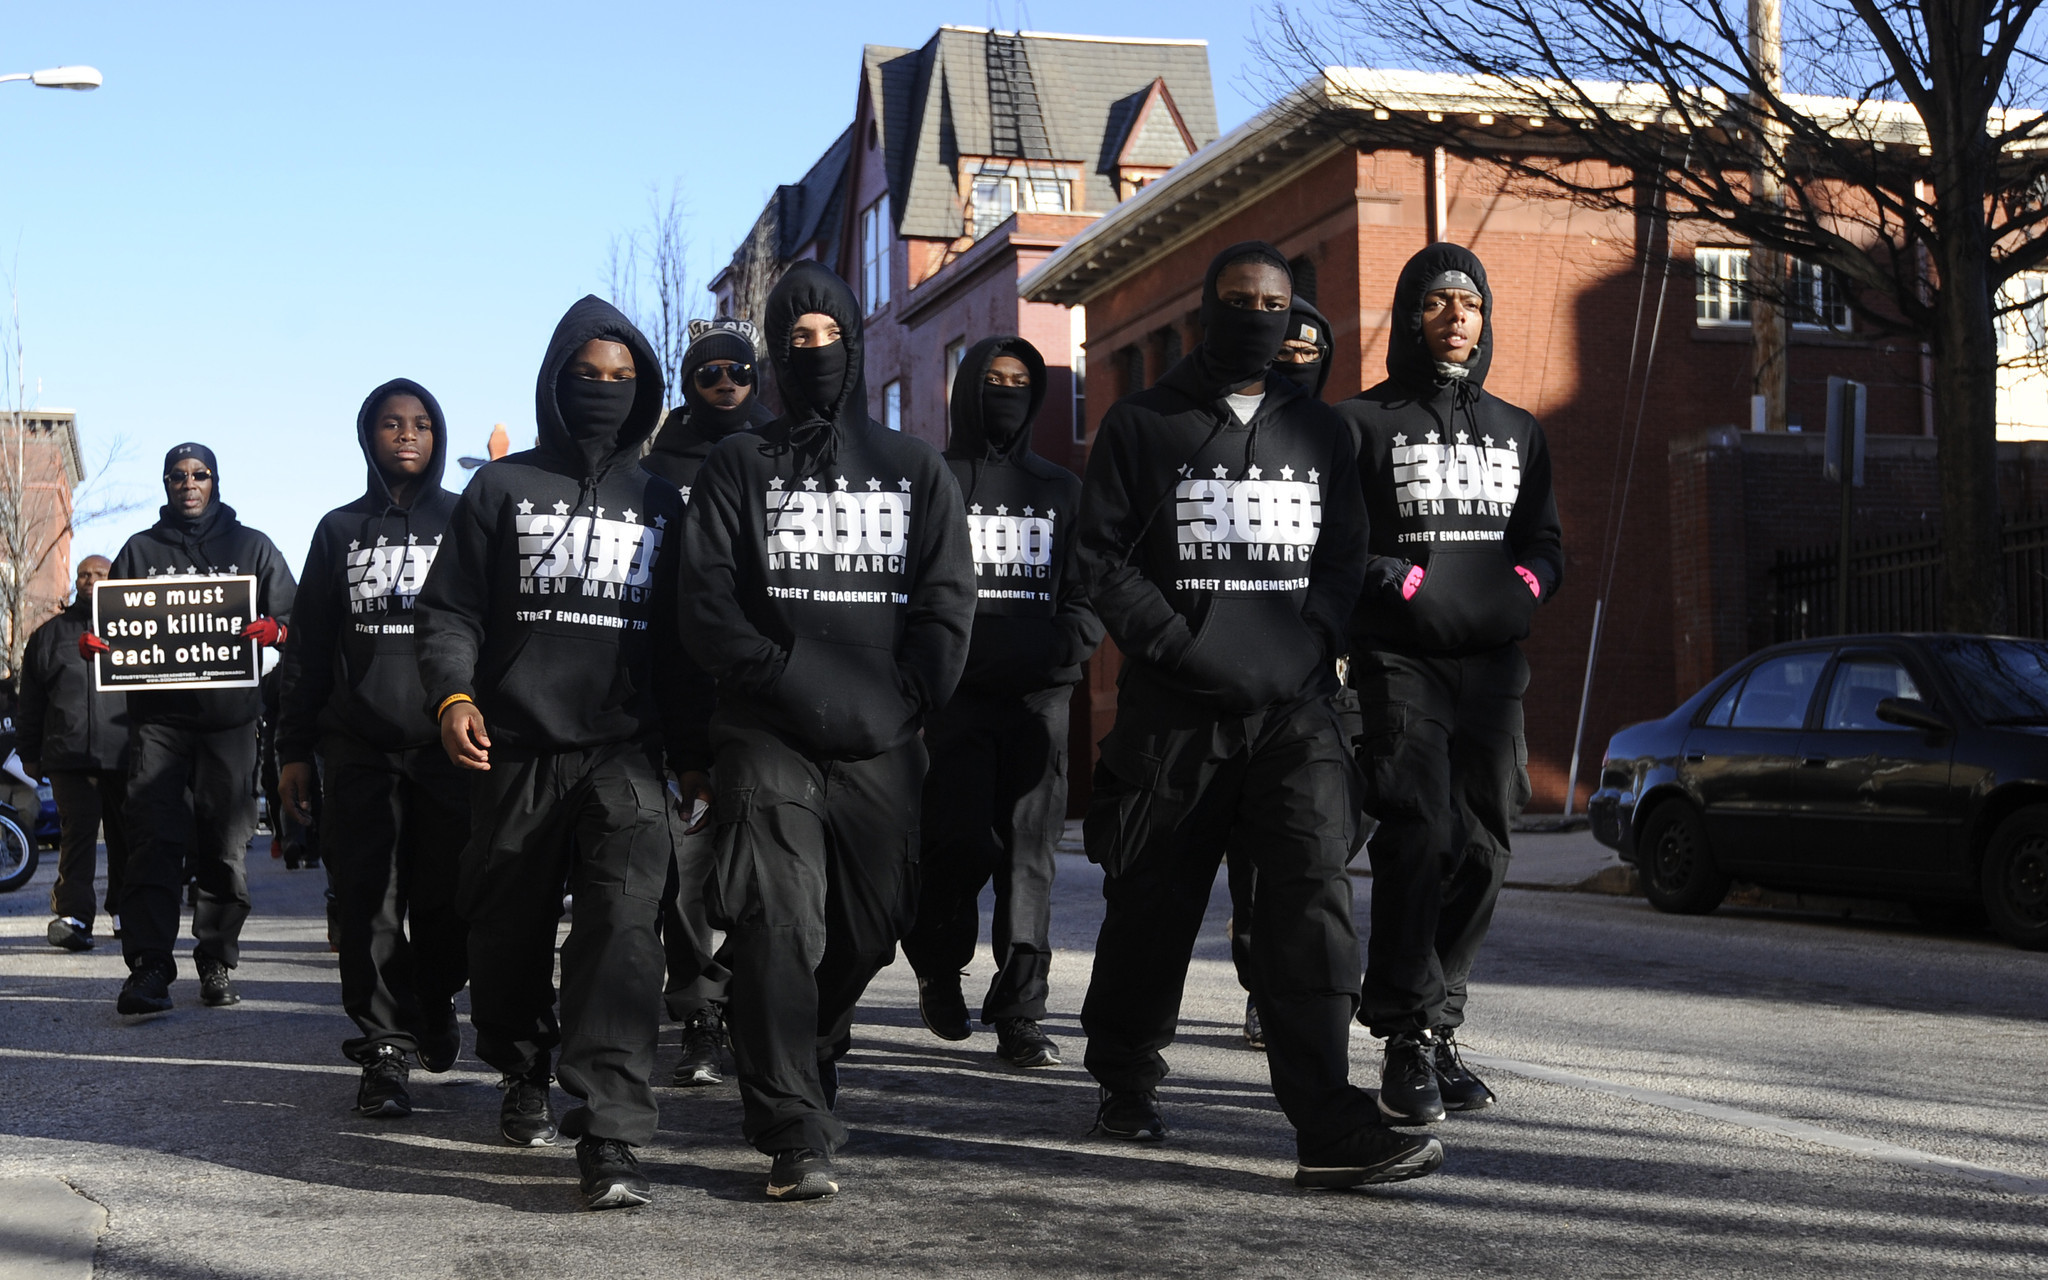 300 Men March rally with city on brink of 300 homicides - Baltimore Sun2048 x 1280